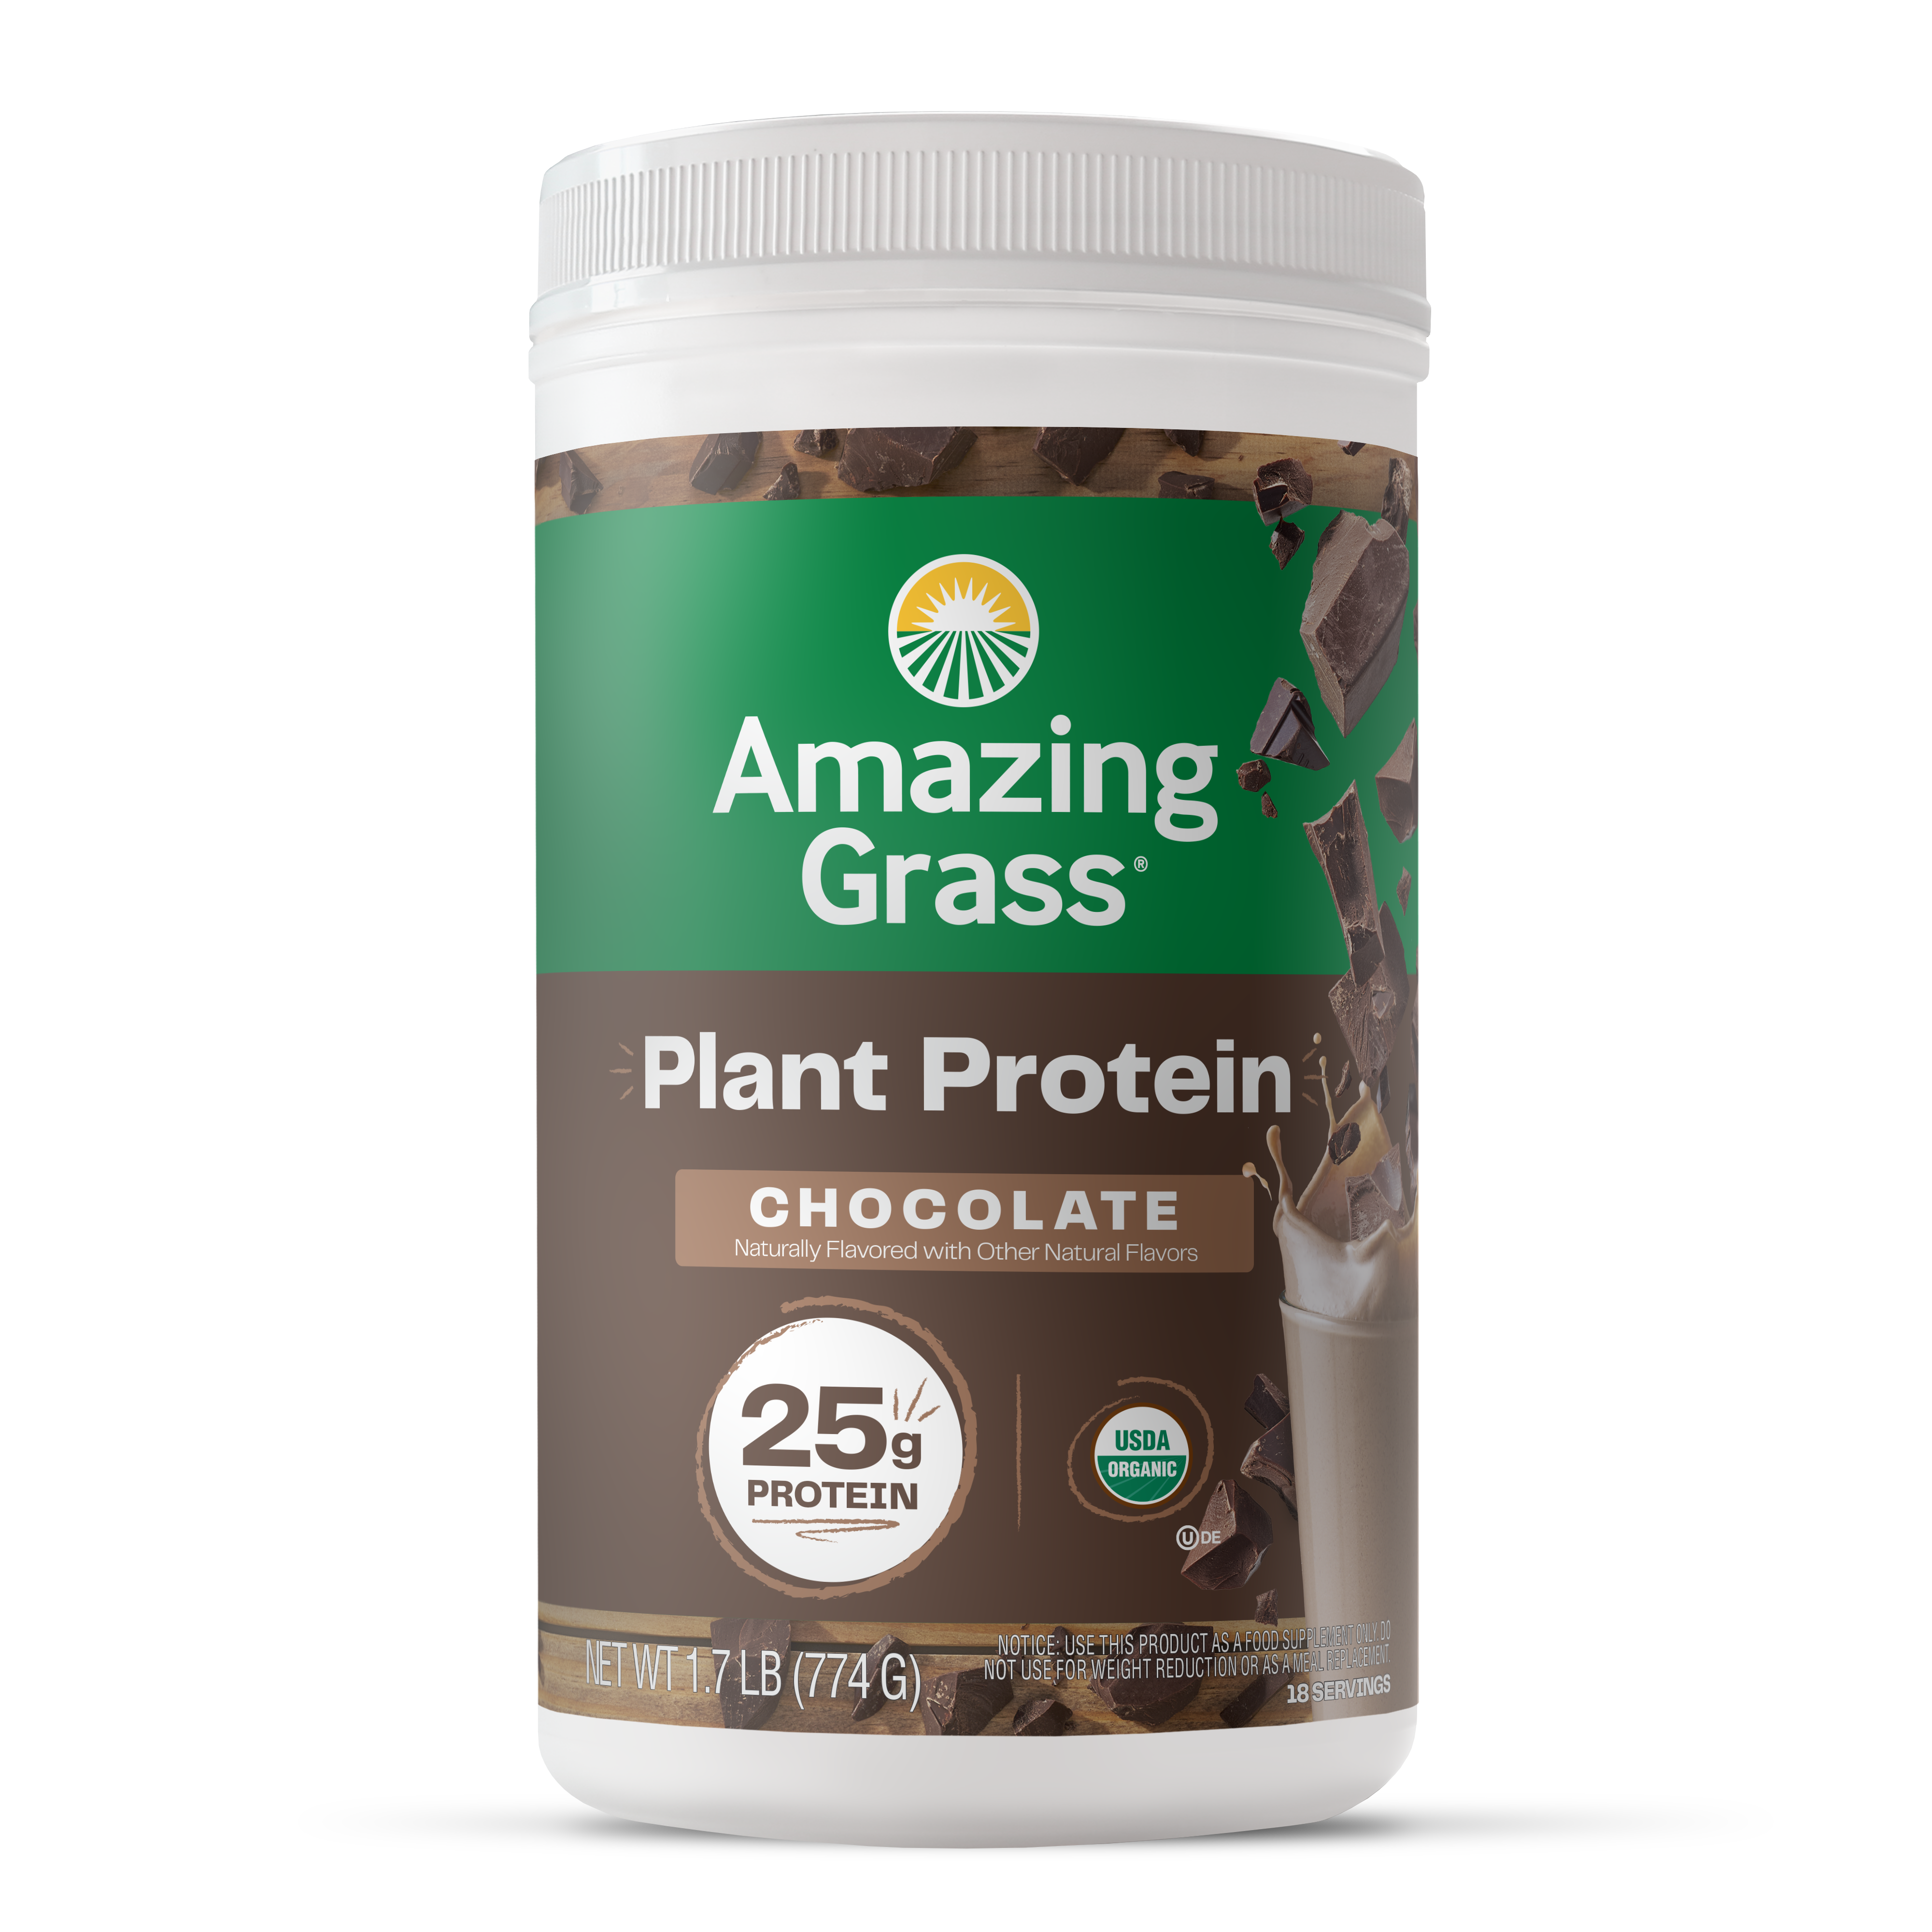 Plant Protein Chocolate